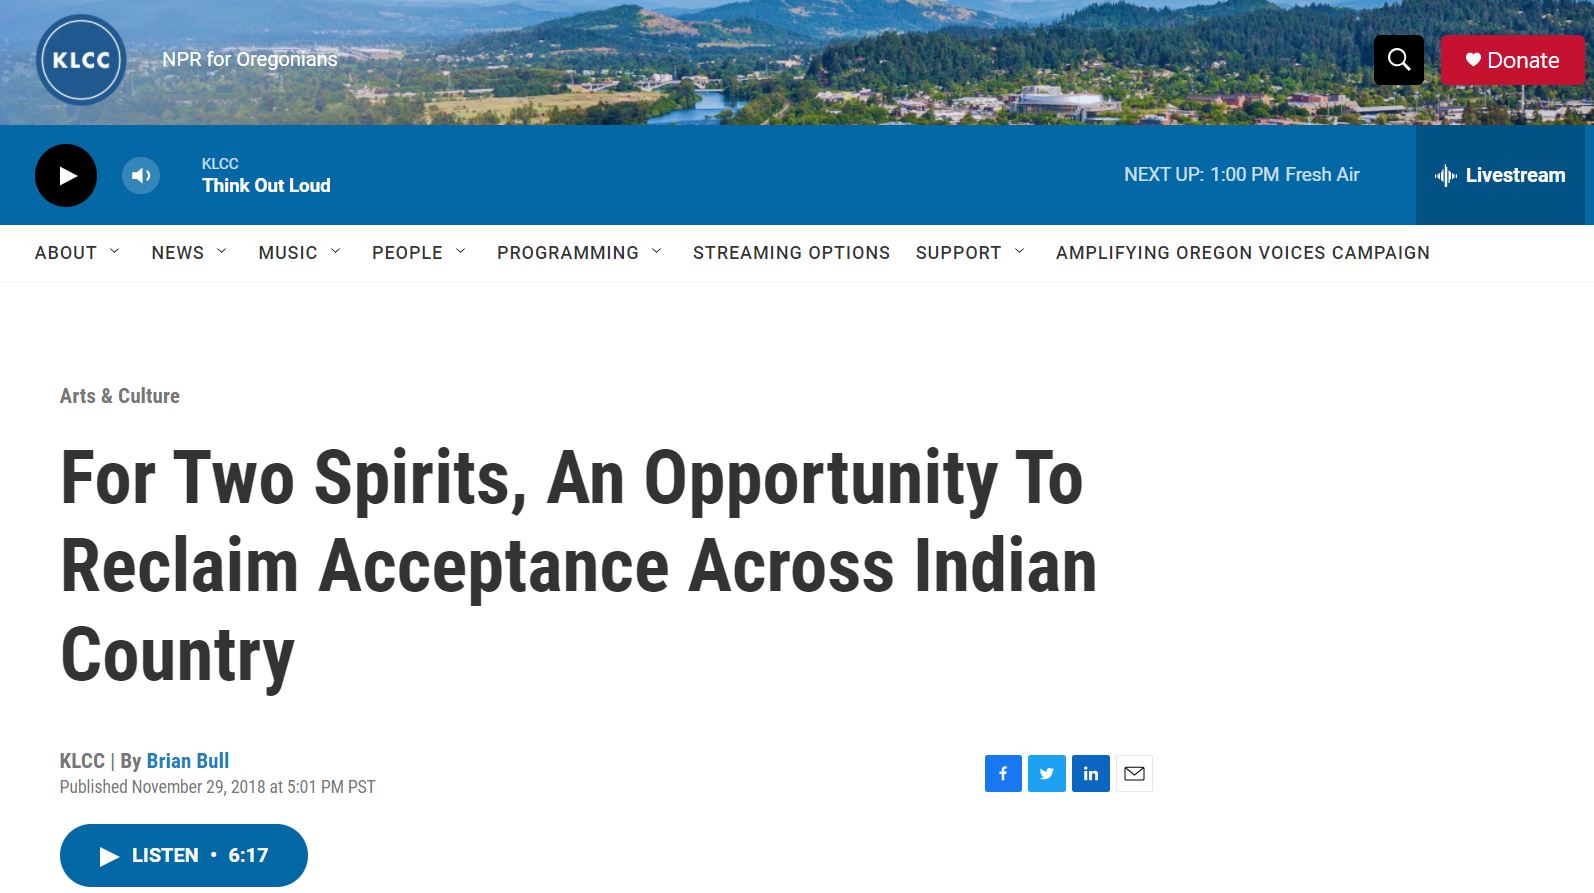 For Two Spirits, An Opportunity To Reclaim Acceptance Across Indian Country